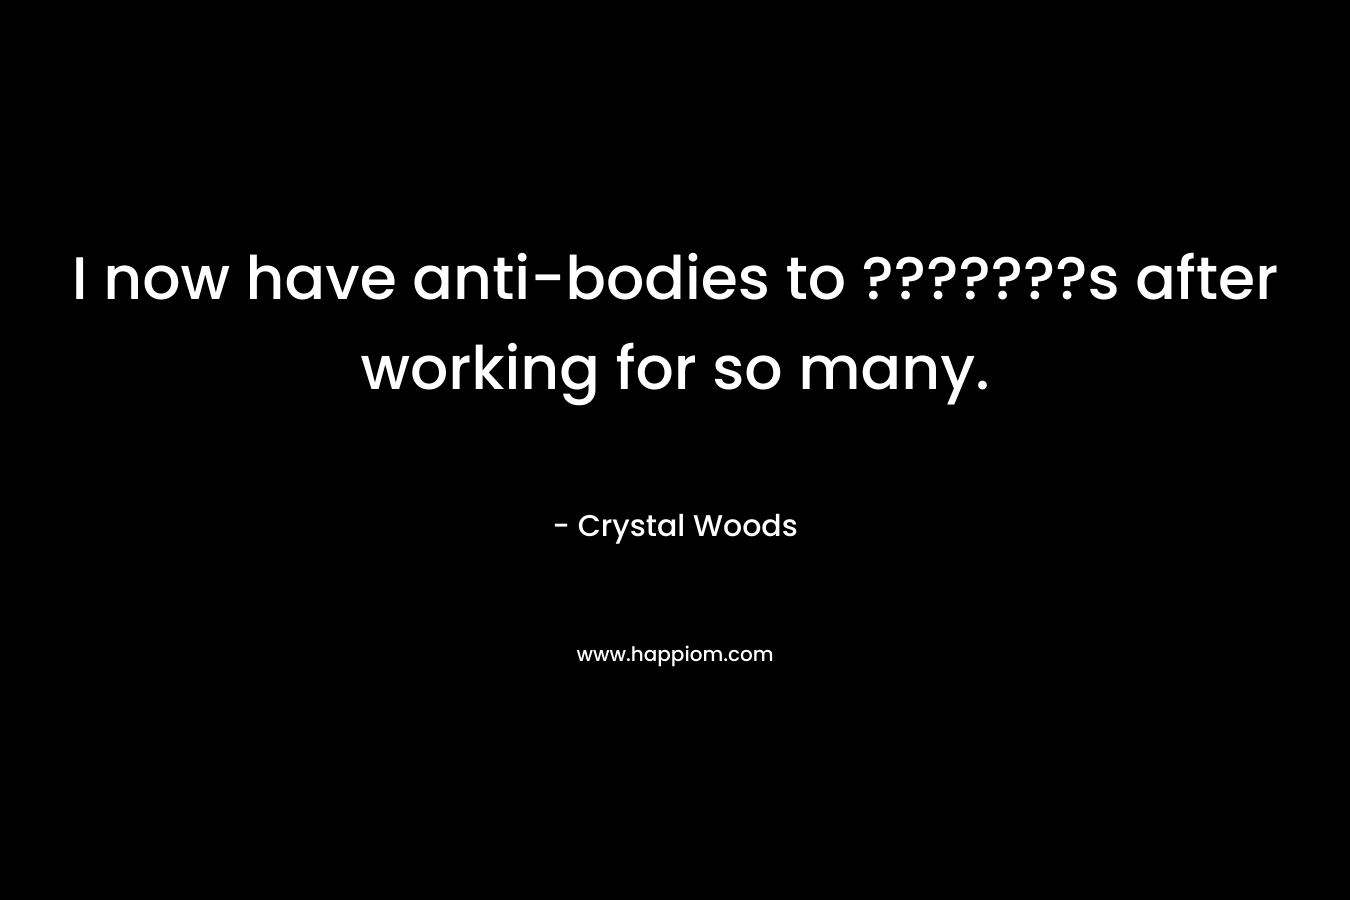 I now have anti-bodies to ???????s after working for so many.